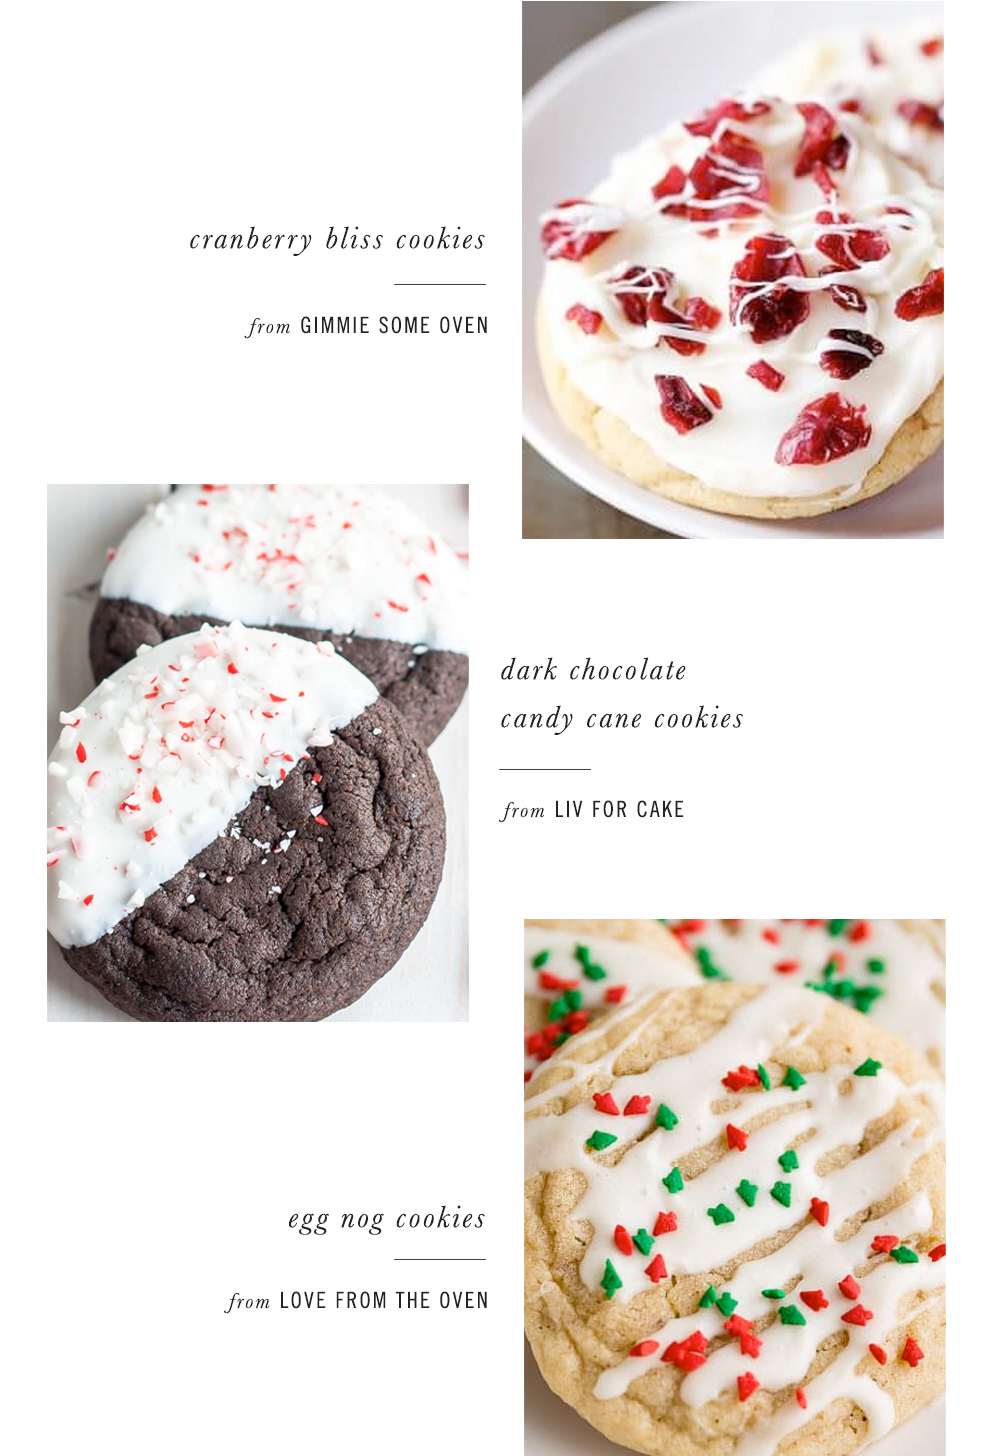 merry & sweet - holiday cookie & treats recipe roundup